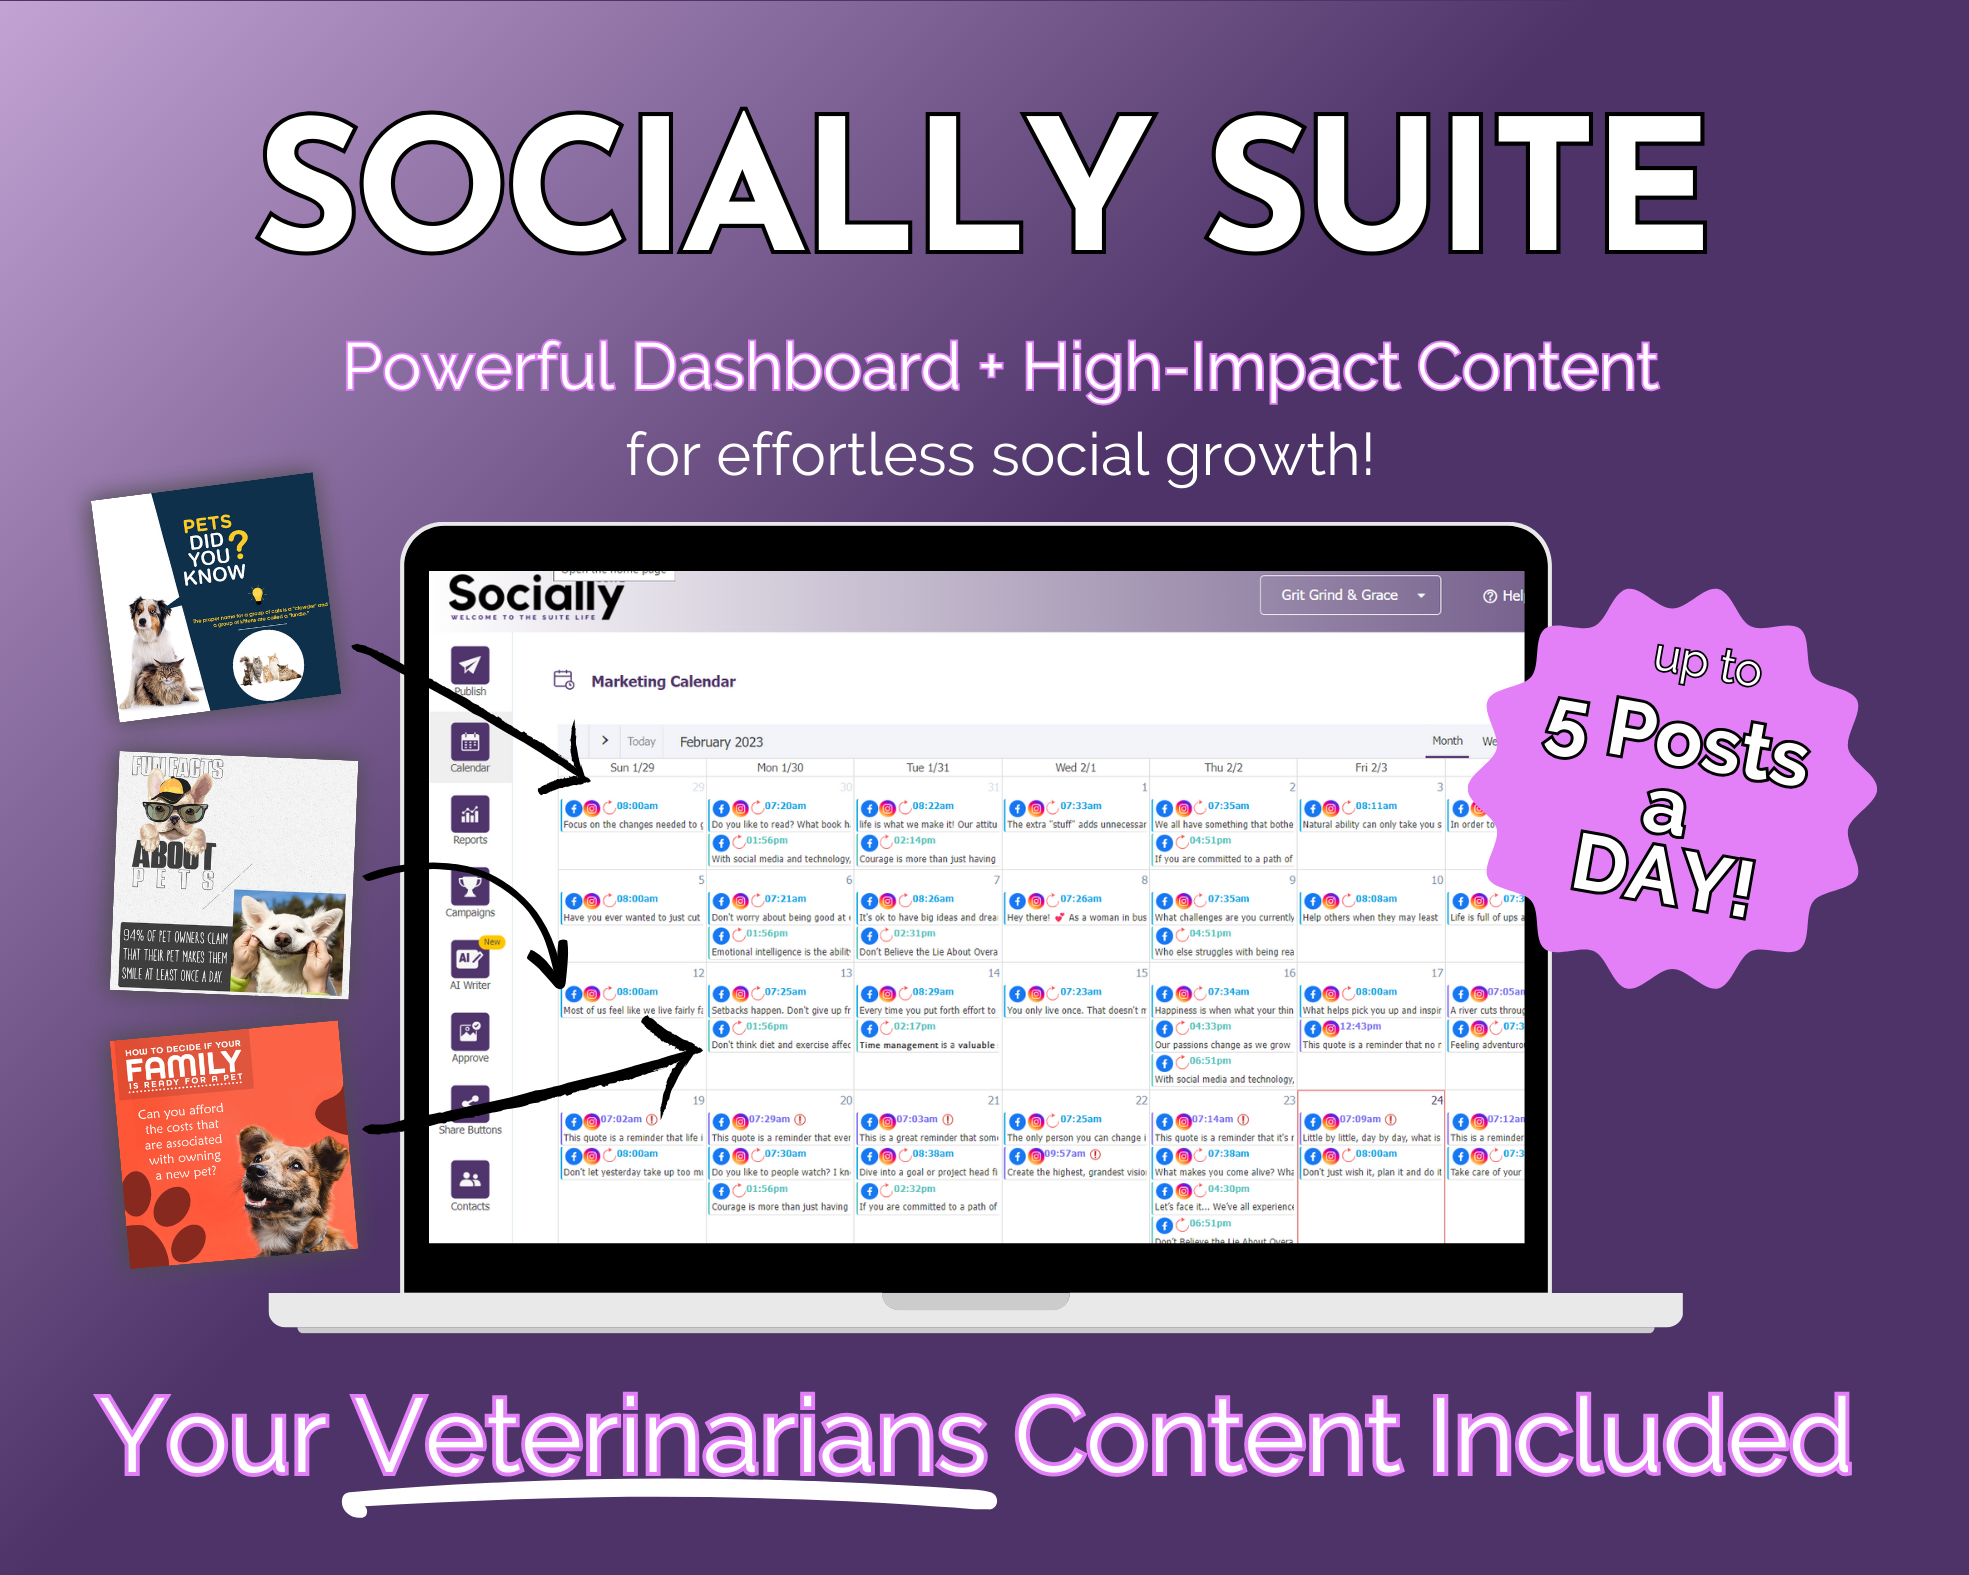 Get Socially Inclined's Socially Suite Membership promotional graphic highlighting features like powerful content dashboard, high-impact content, and up to 5 posts a day for veterinarians to enhance their online presence.